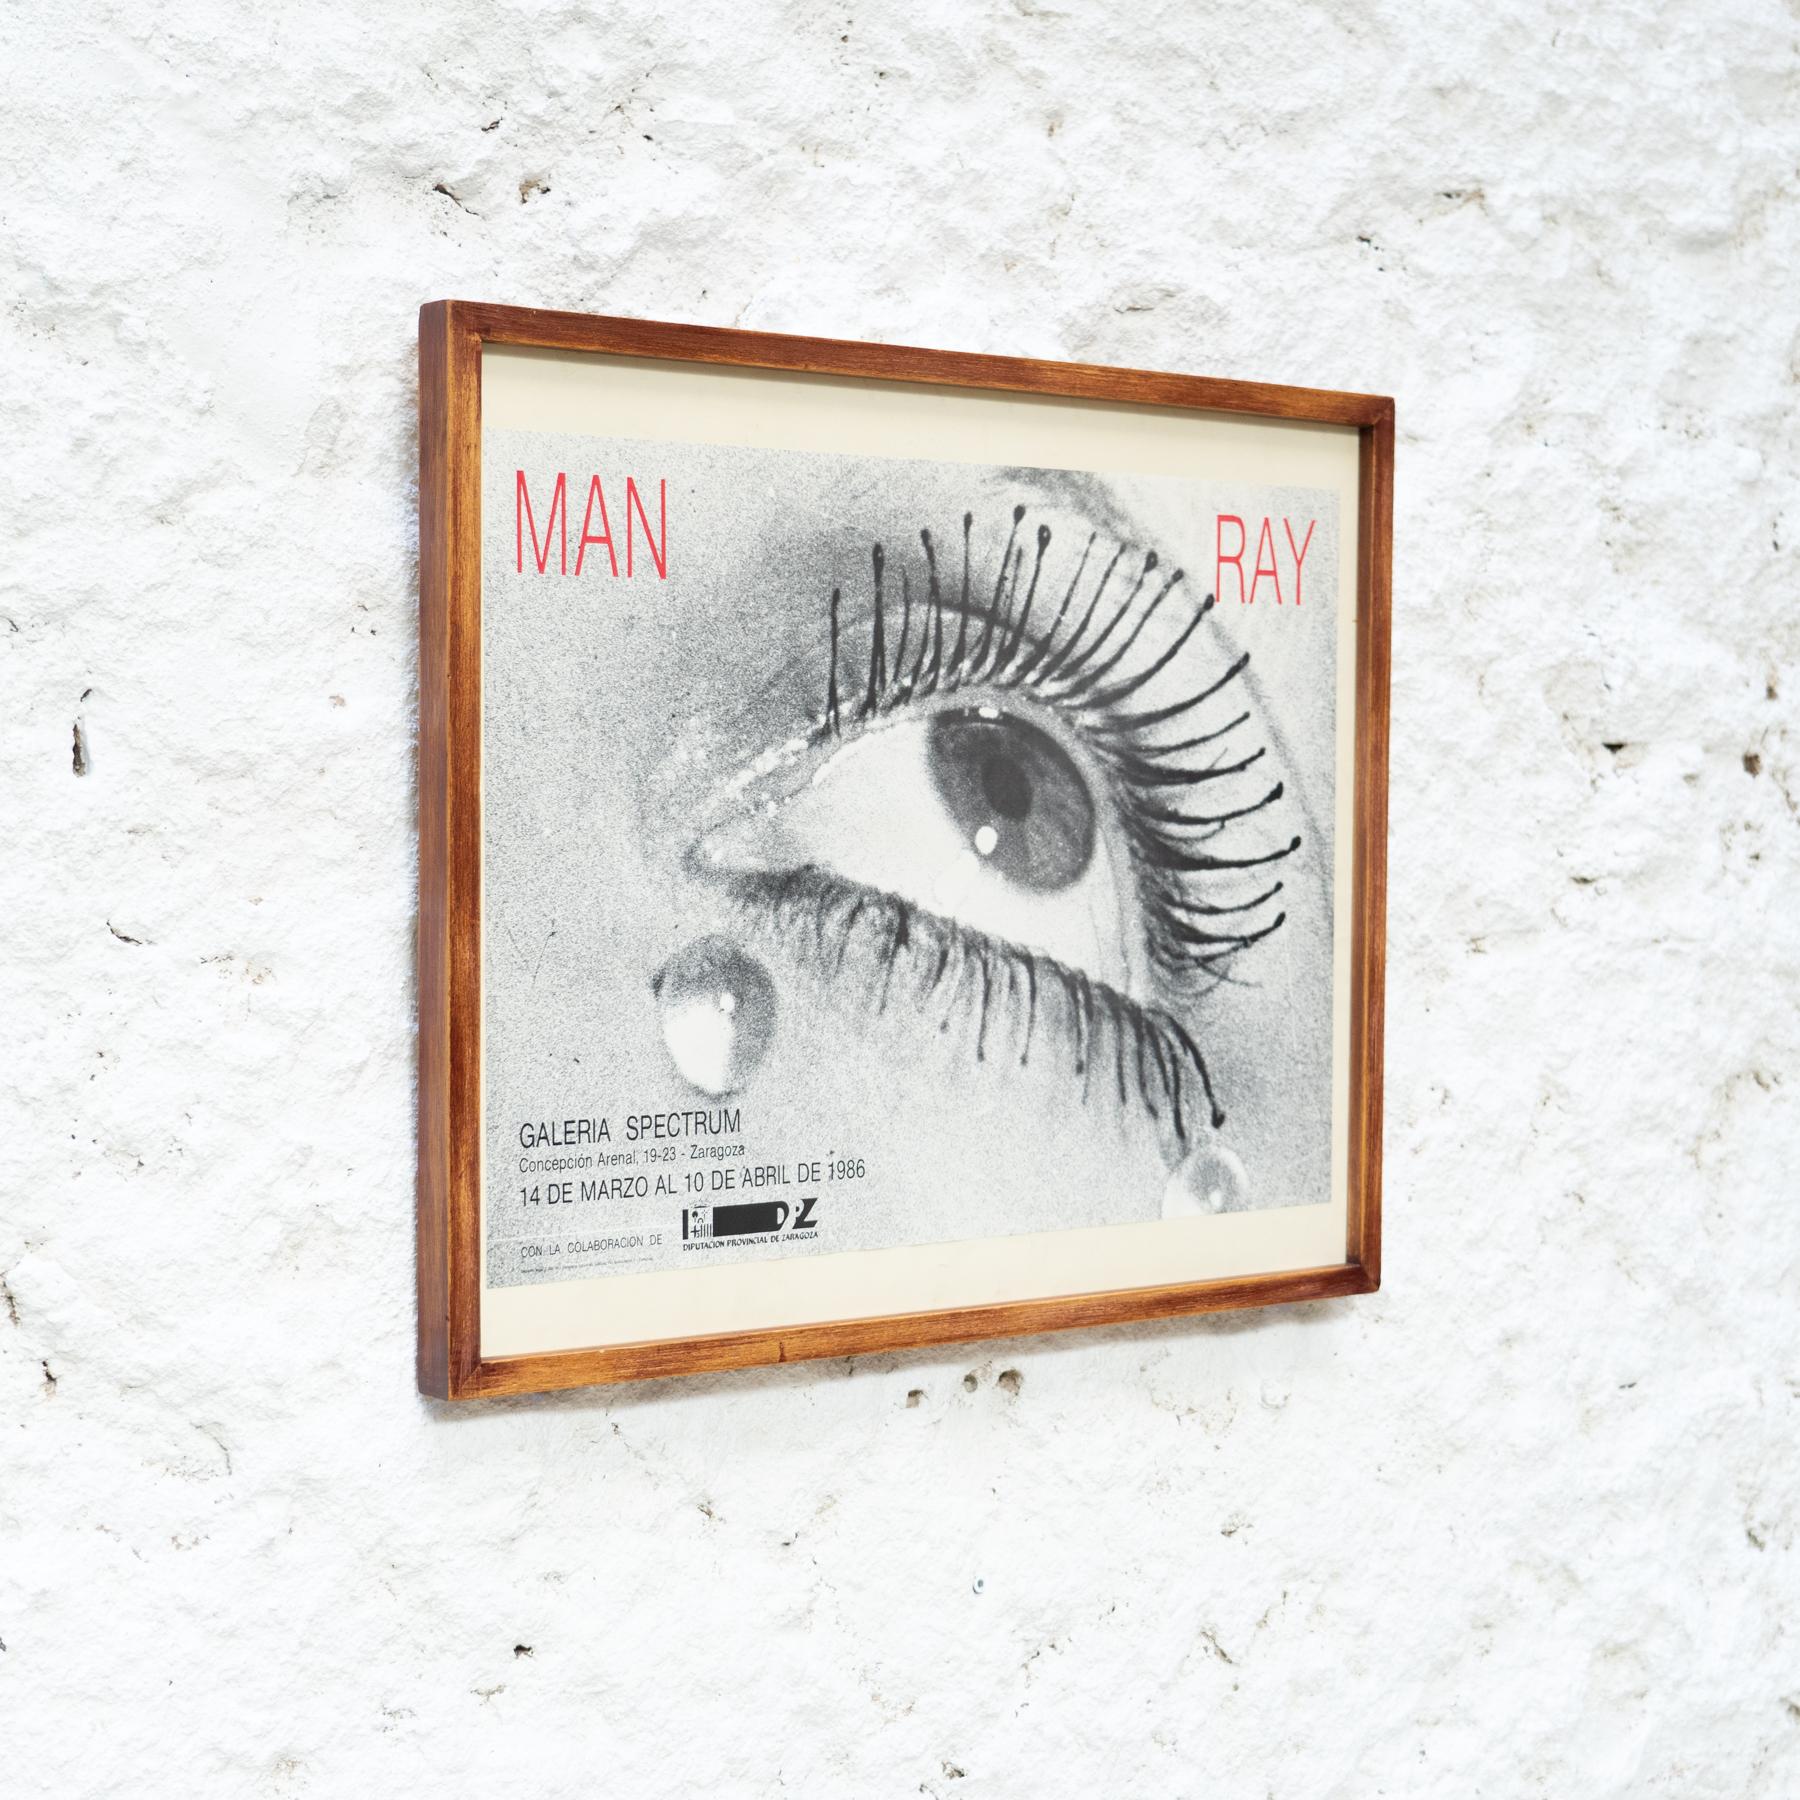 Mid-Century Modern Framed Poster of Man Ray Exhibition in Galeria Spectrum Zaragoza, 1986 For Sale